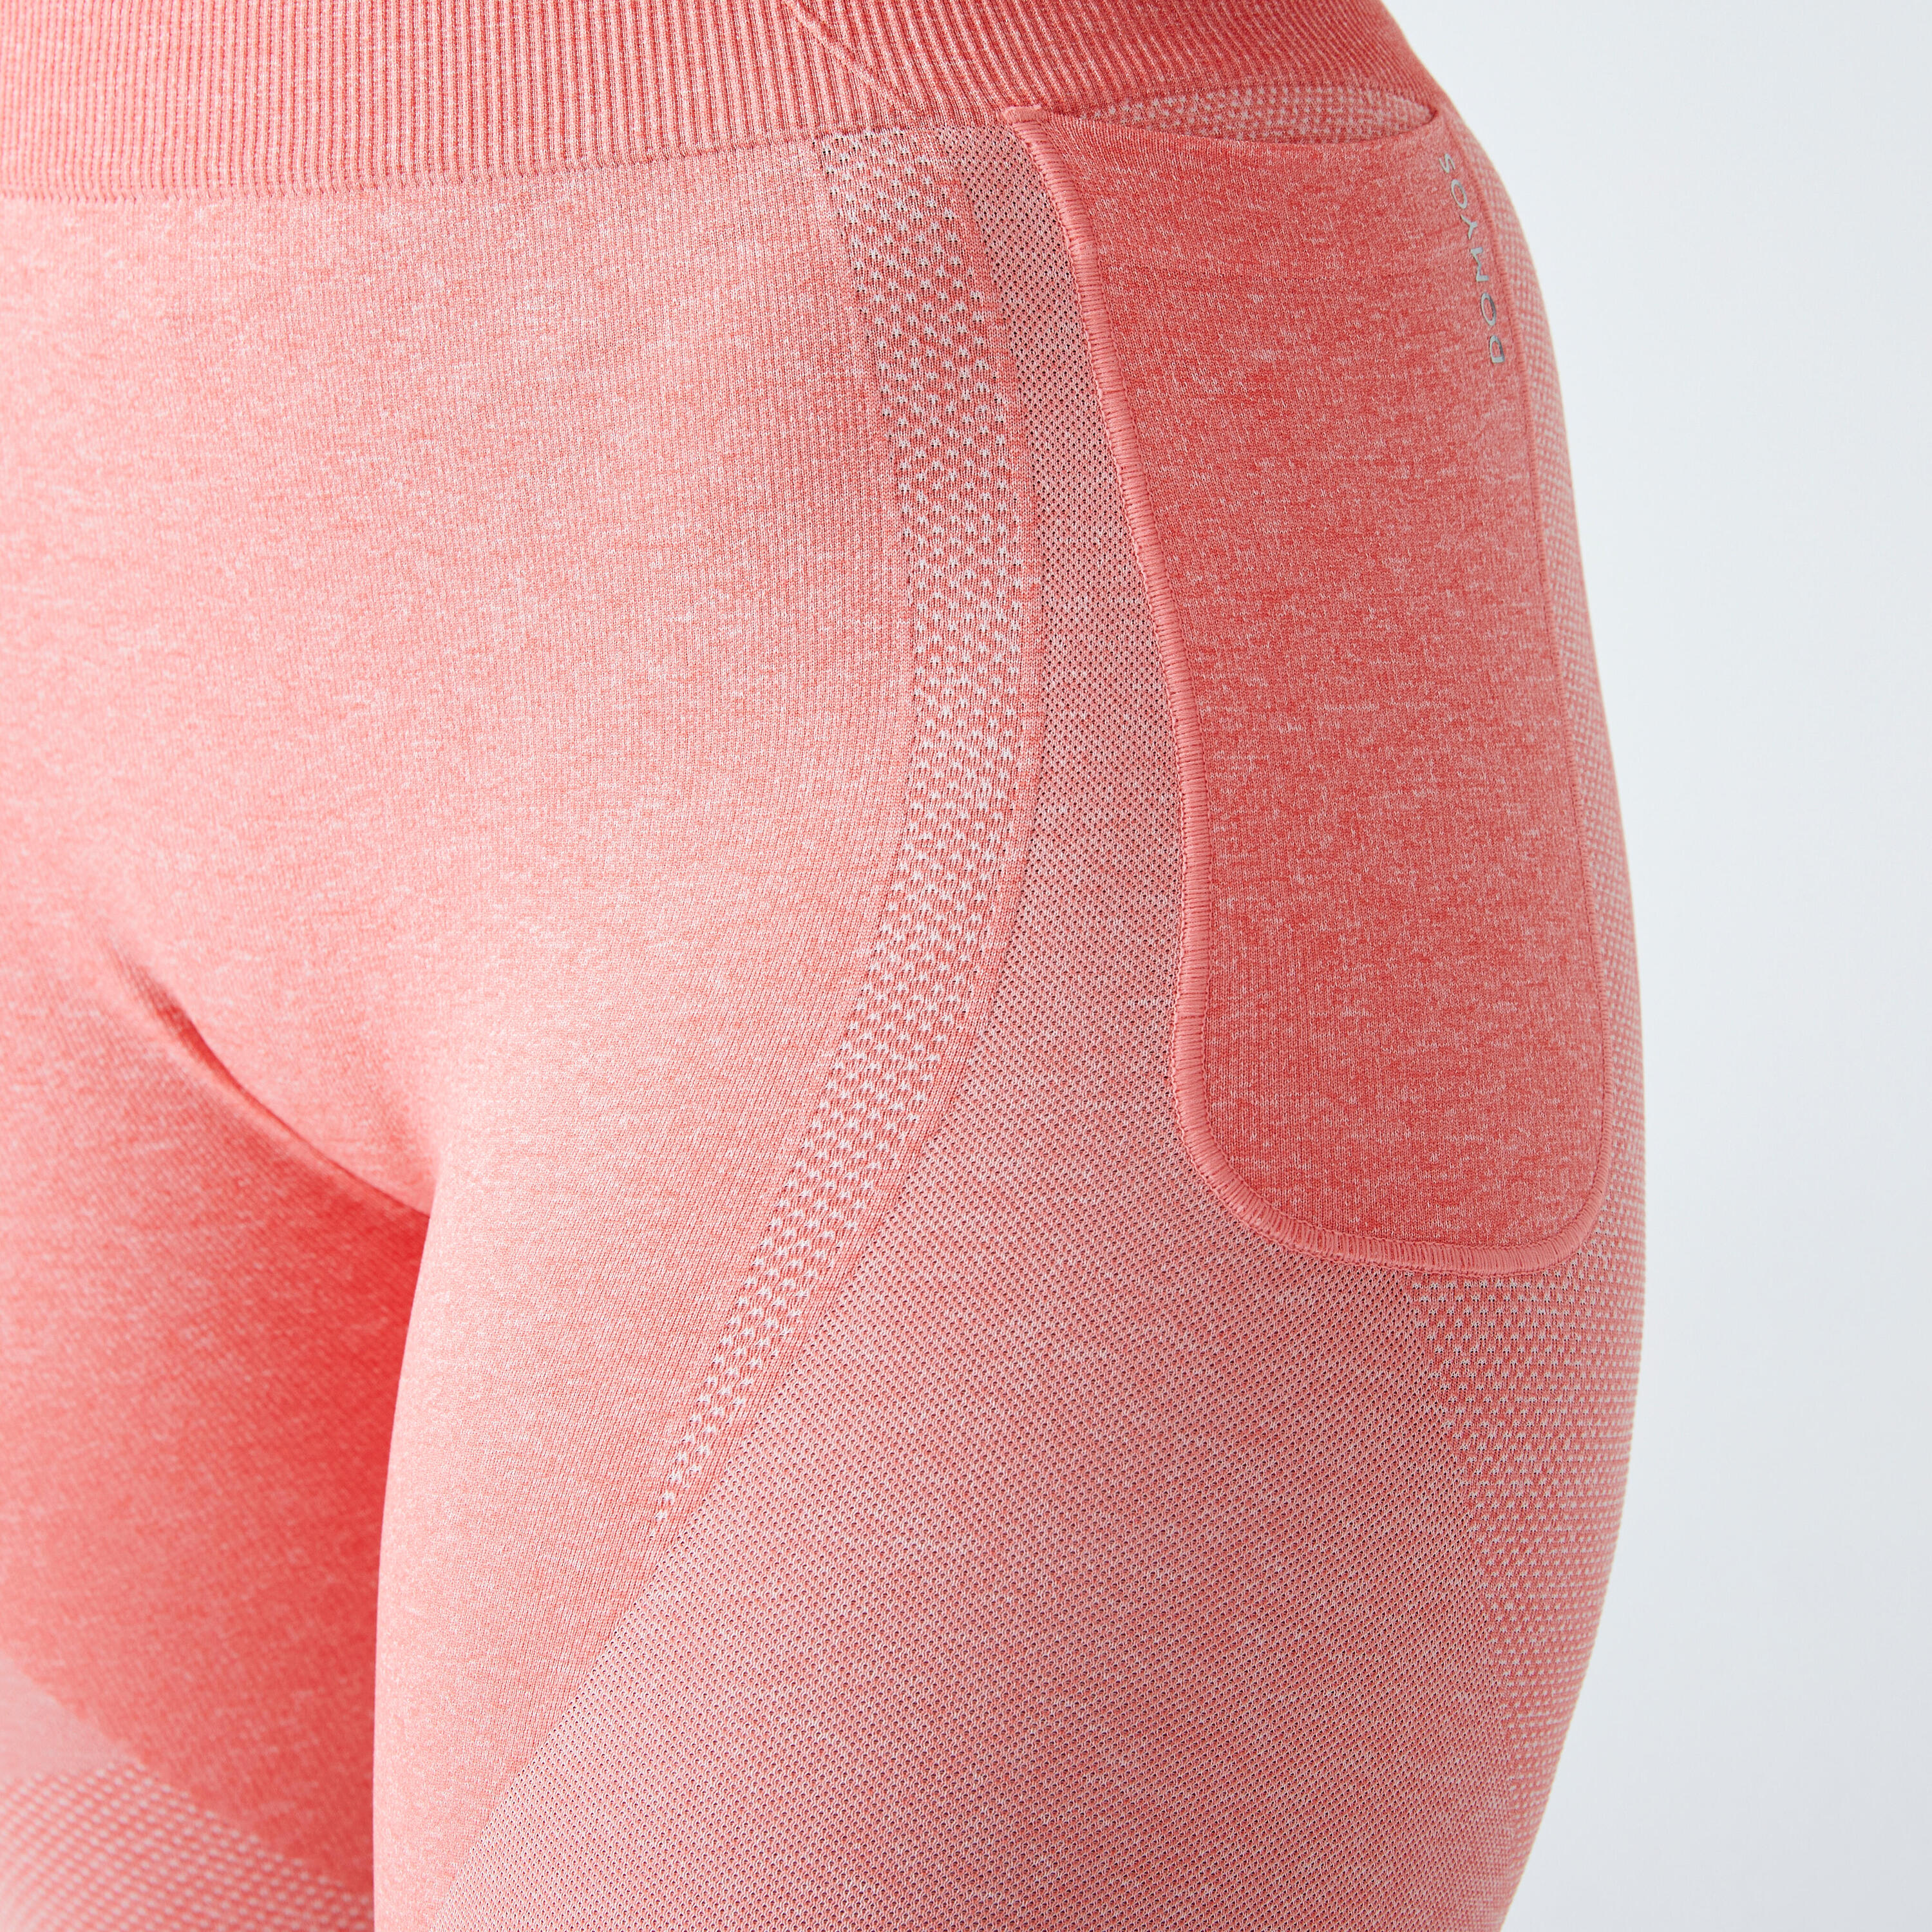 High-Waisted Seamless Fitness Leggings with Phone Pocket - Pink 5/5